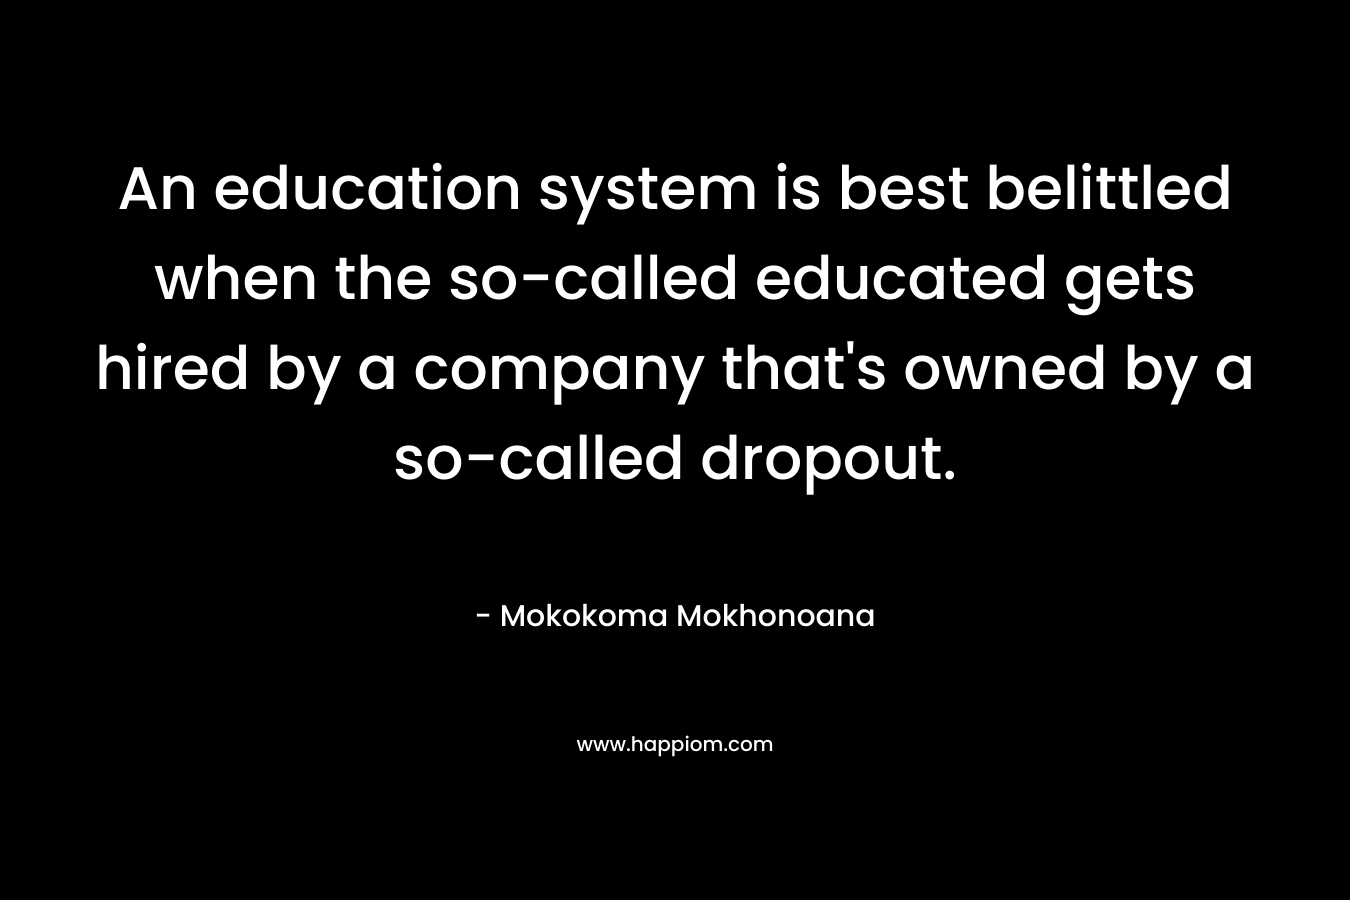 An education system is best belittled when the so-called educated gets hired by a company that’s owned by a so-called dropout. – Mokokoma Mokhonoana